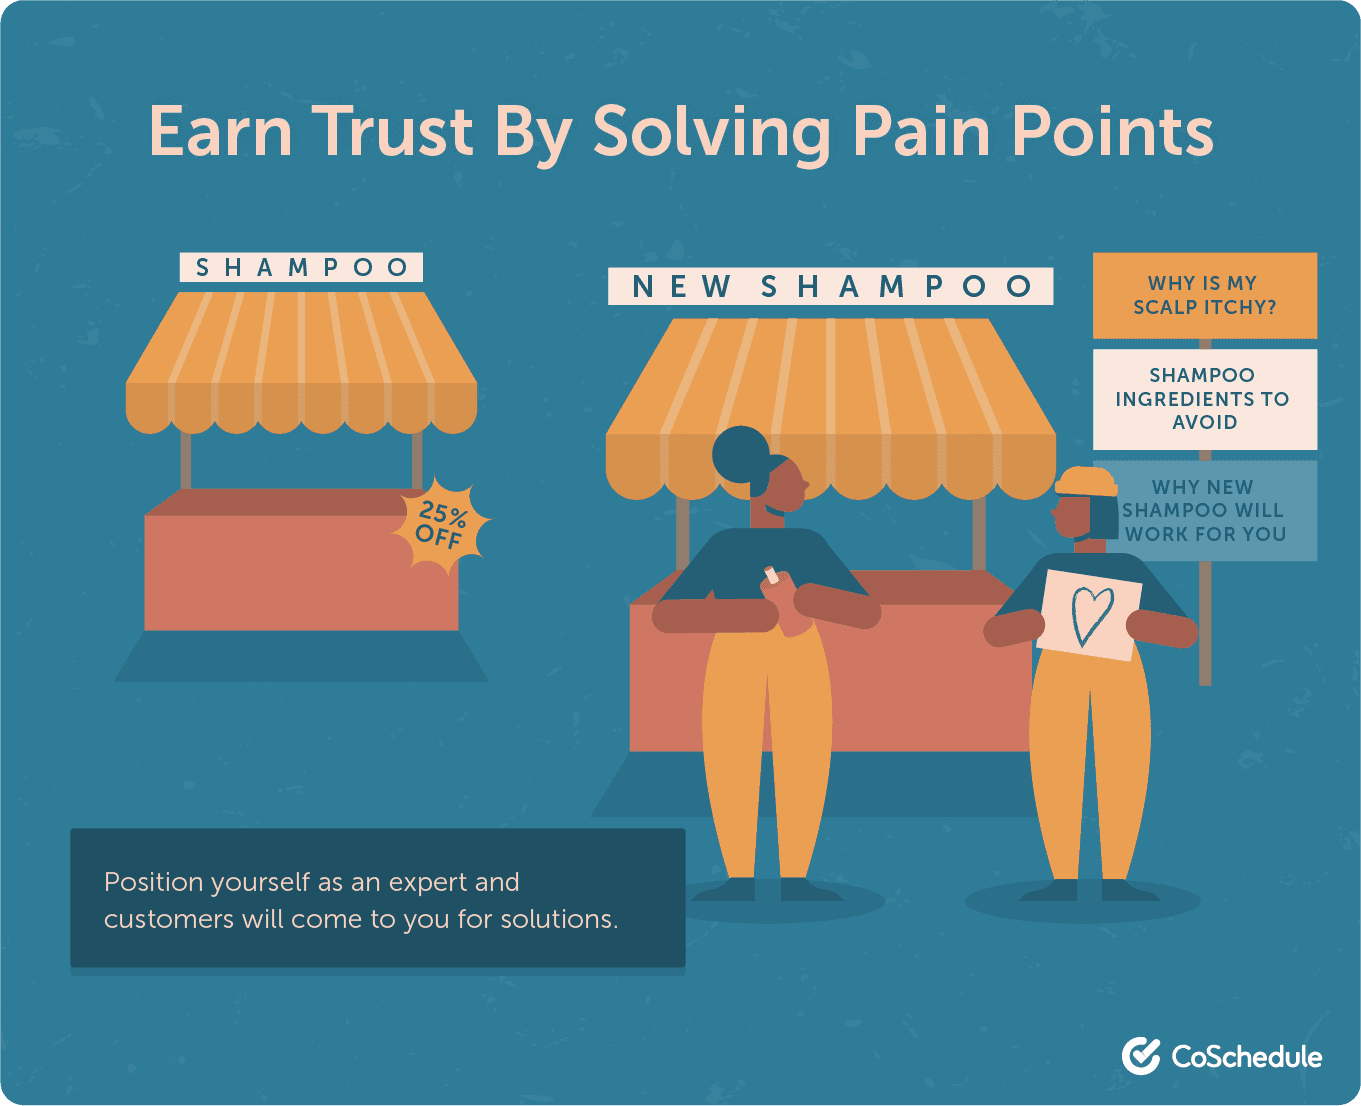 Earn trust by solving pain points